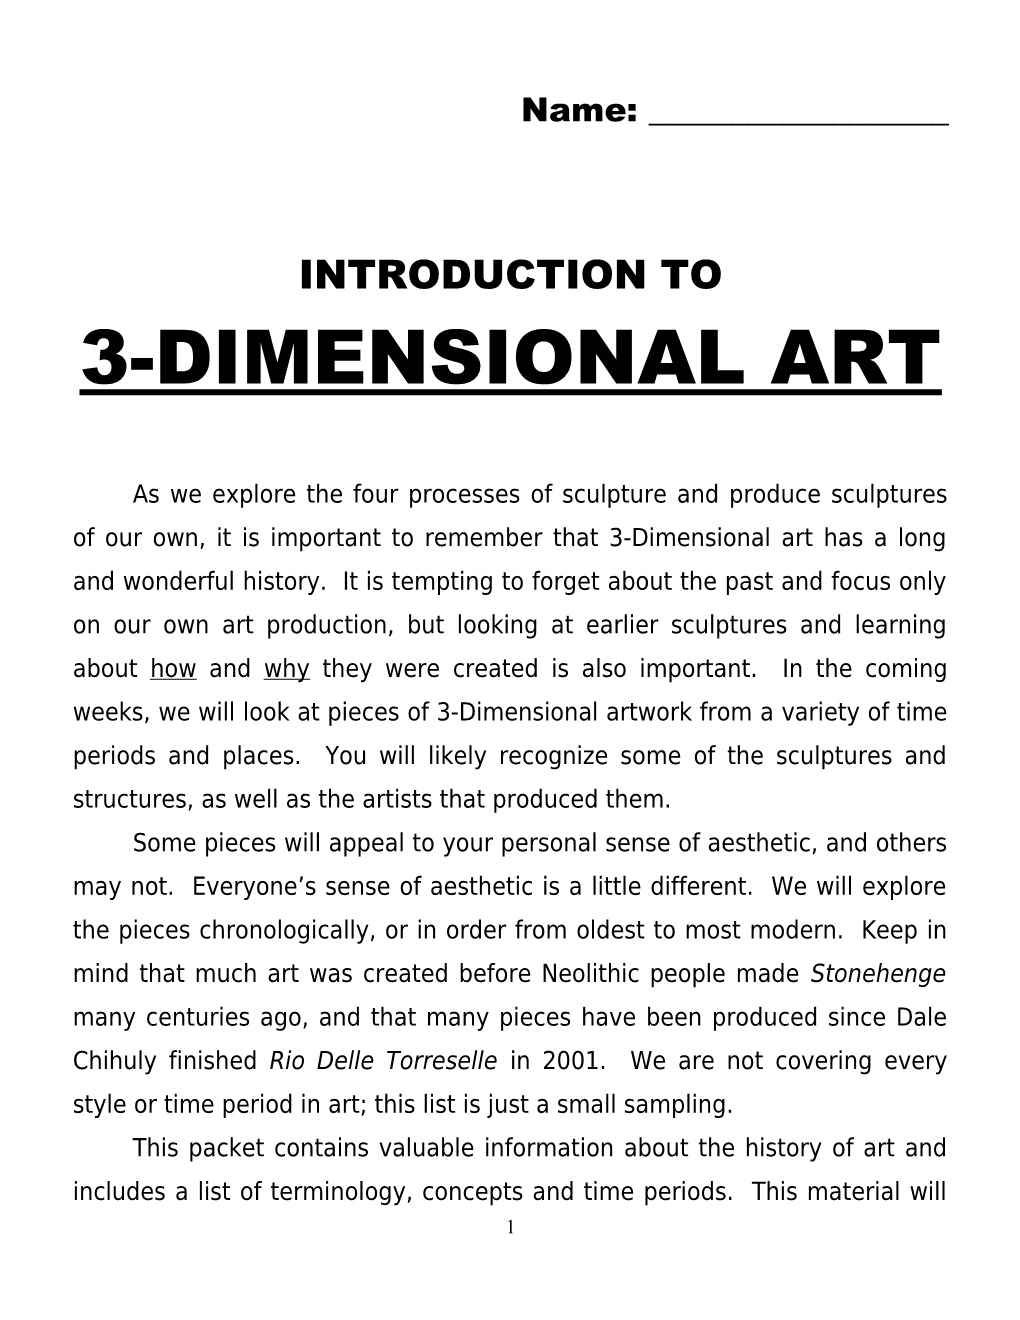 Introduction to 3-Dimensional Art